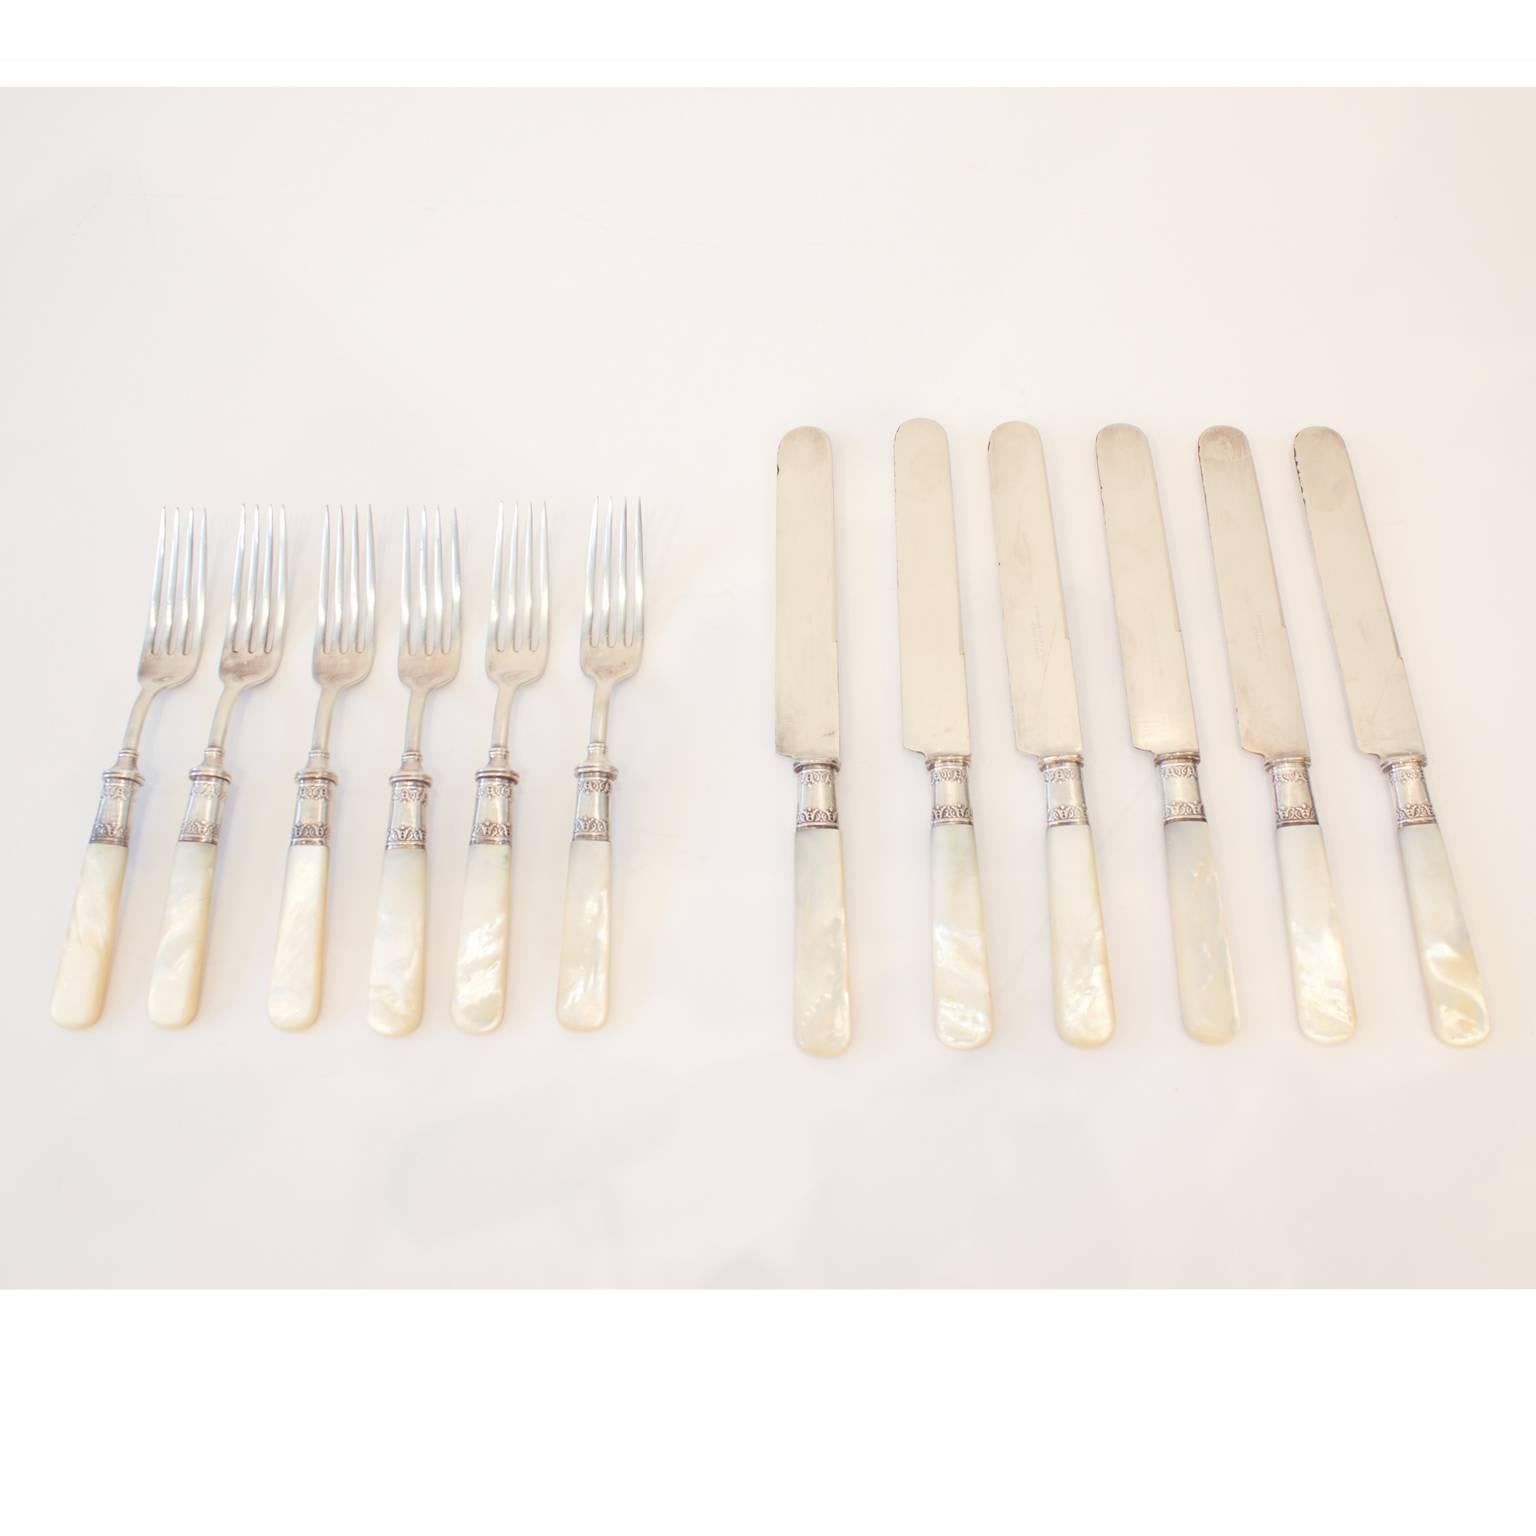 Rare Landers Frary & Clark knife and fork set for six people. These sterling silver forks and knives have exquisite mother-of-pearl handles, in good condition.

Forks measure 7.25